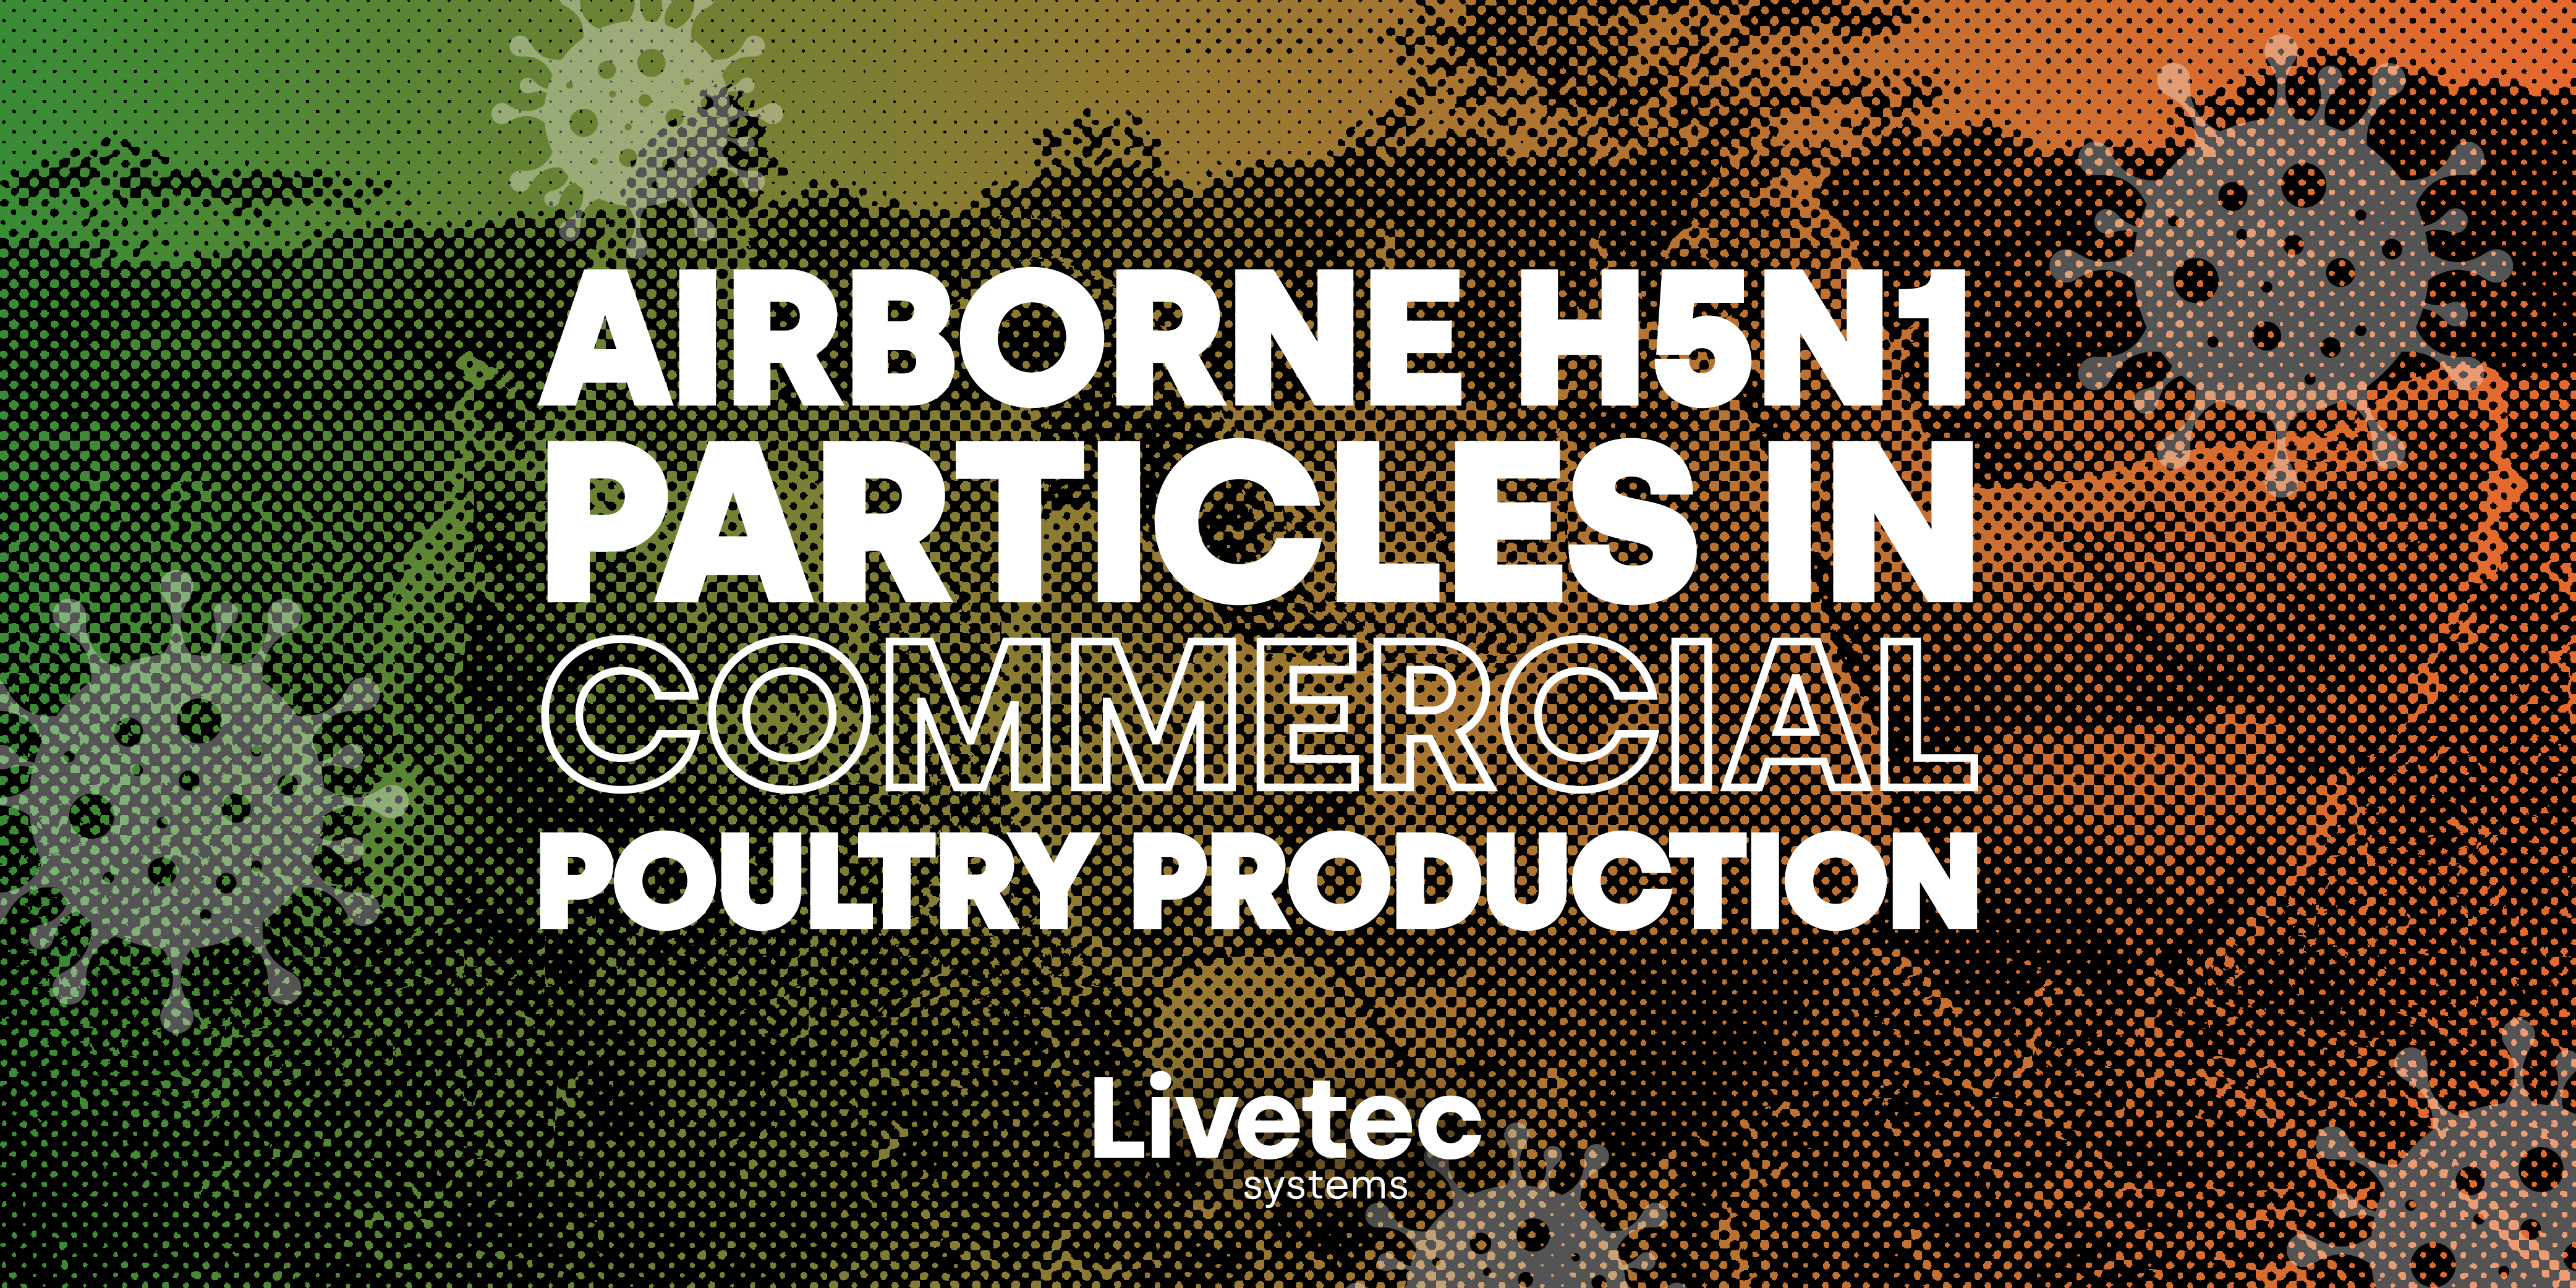 Airborne H5N1 Particles in Commercial Poultry Production blog graphic